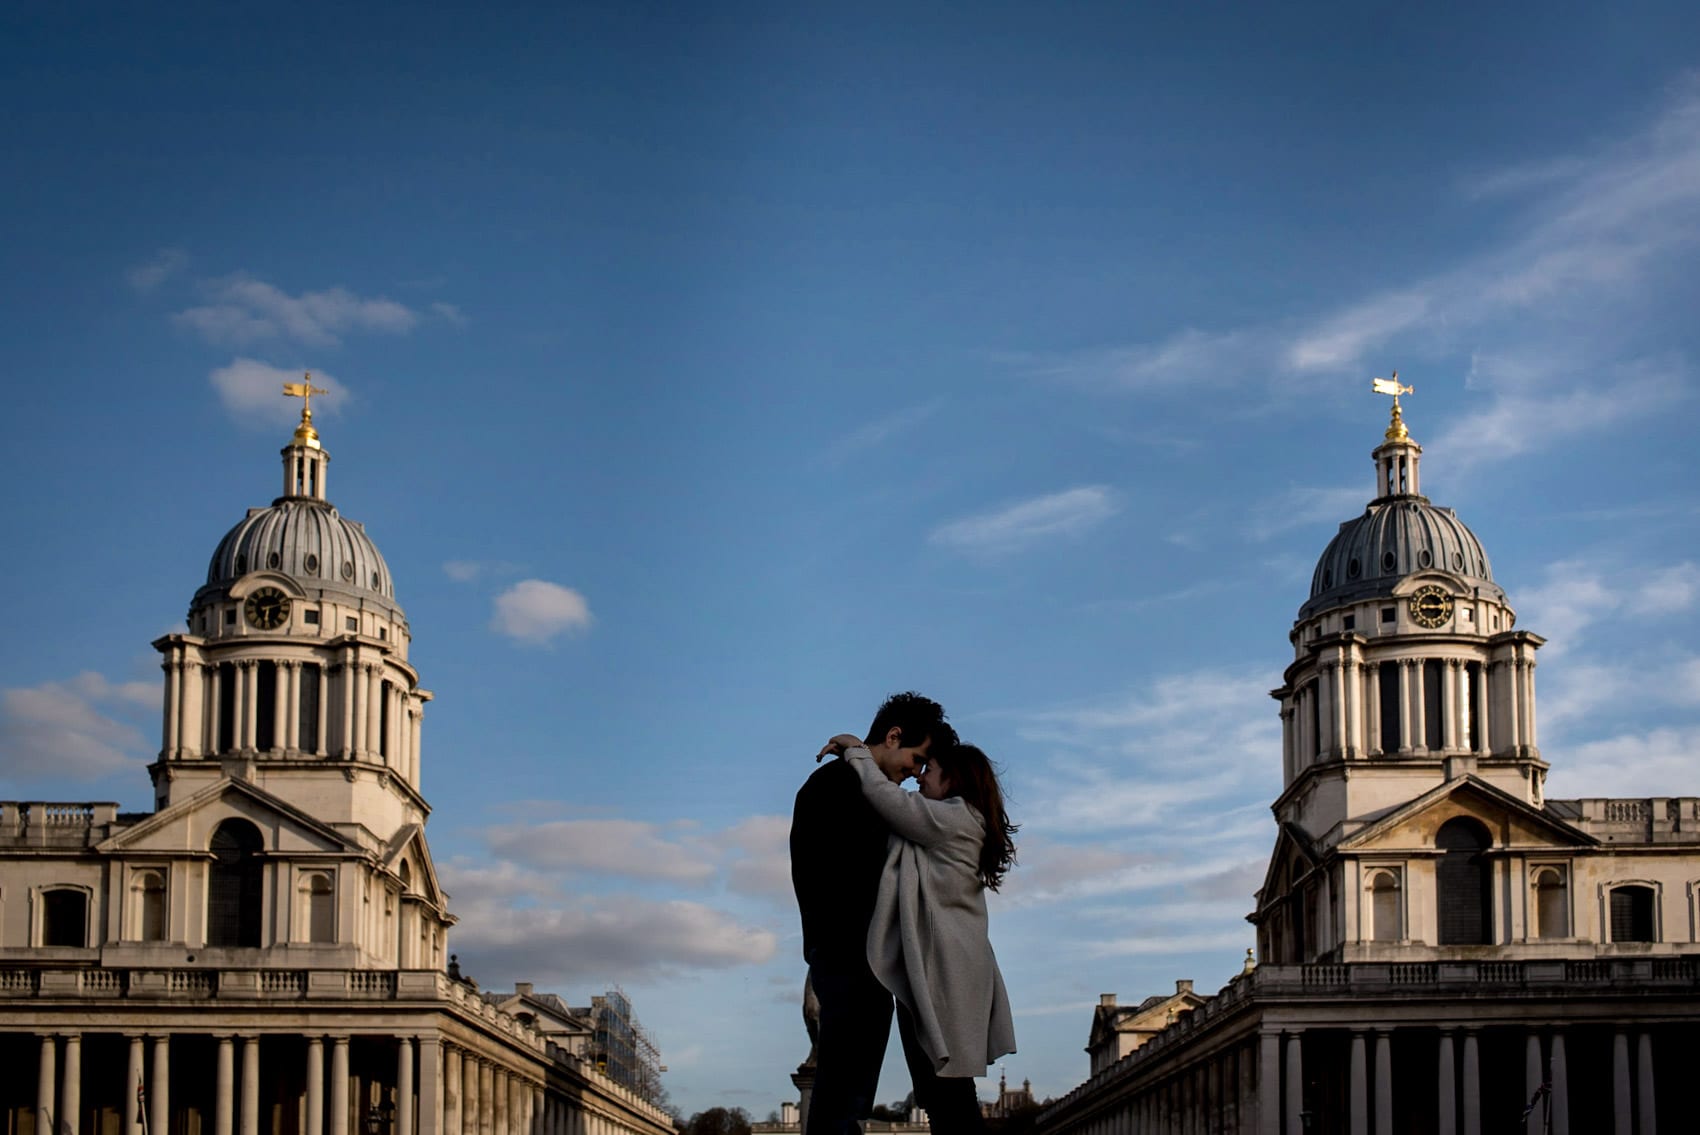 Photo of my proposing to his girlfriend at the Old Royal Naval College, one of the best London locations for a proposal